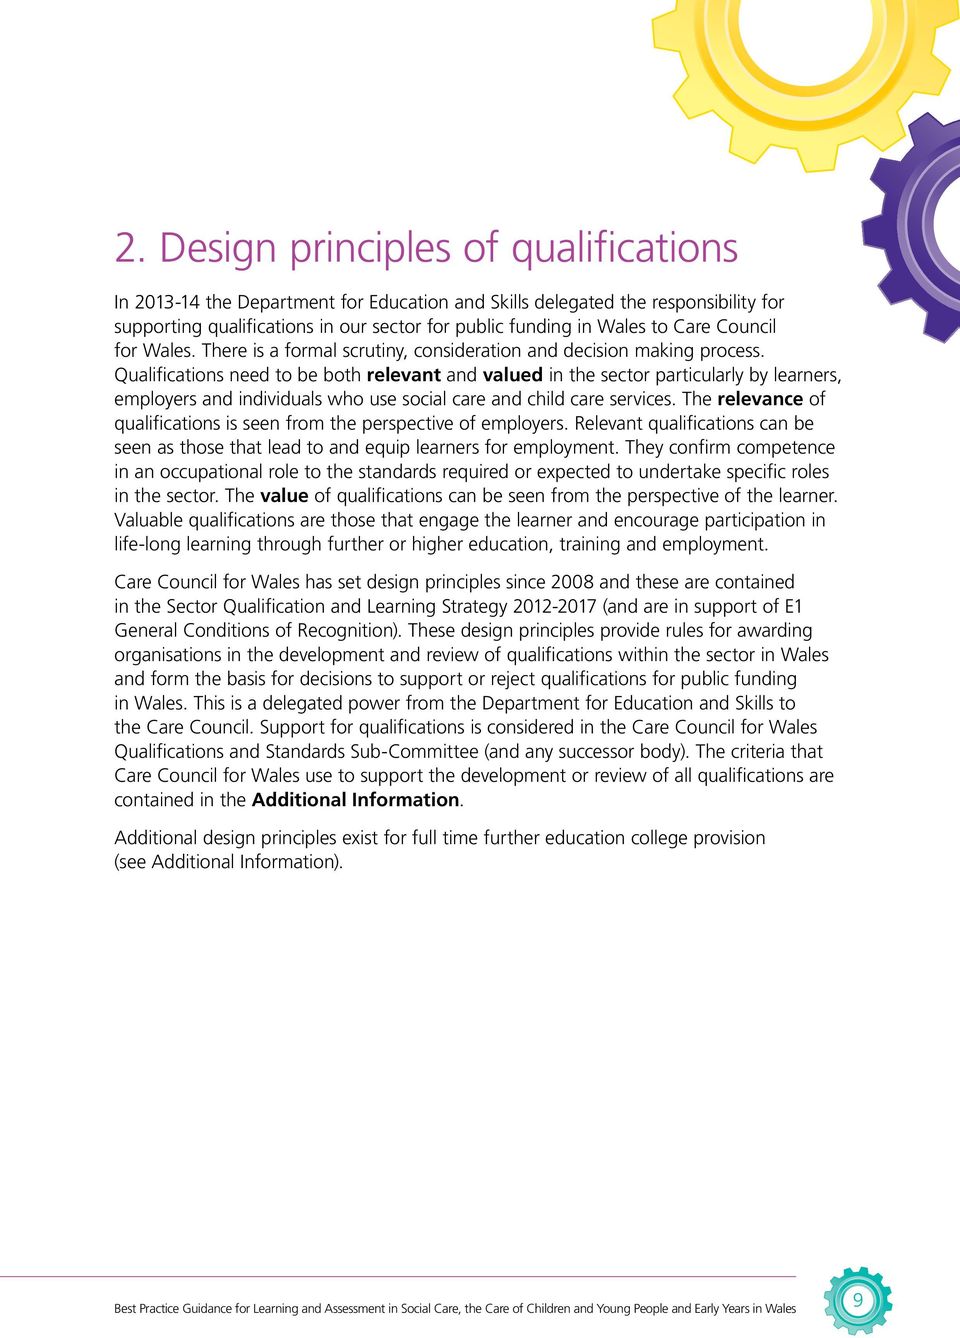 Qualifications need to be both relevant and valued in the sector particularly by learners, employers and individuals who use social care and child care services.